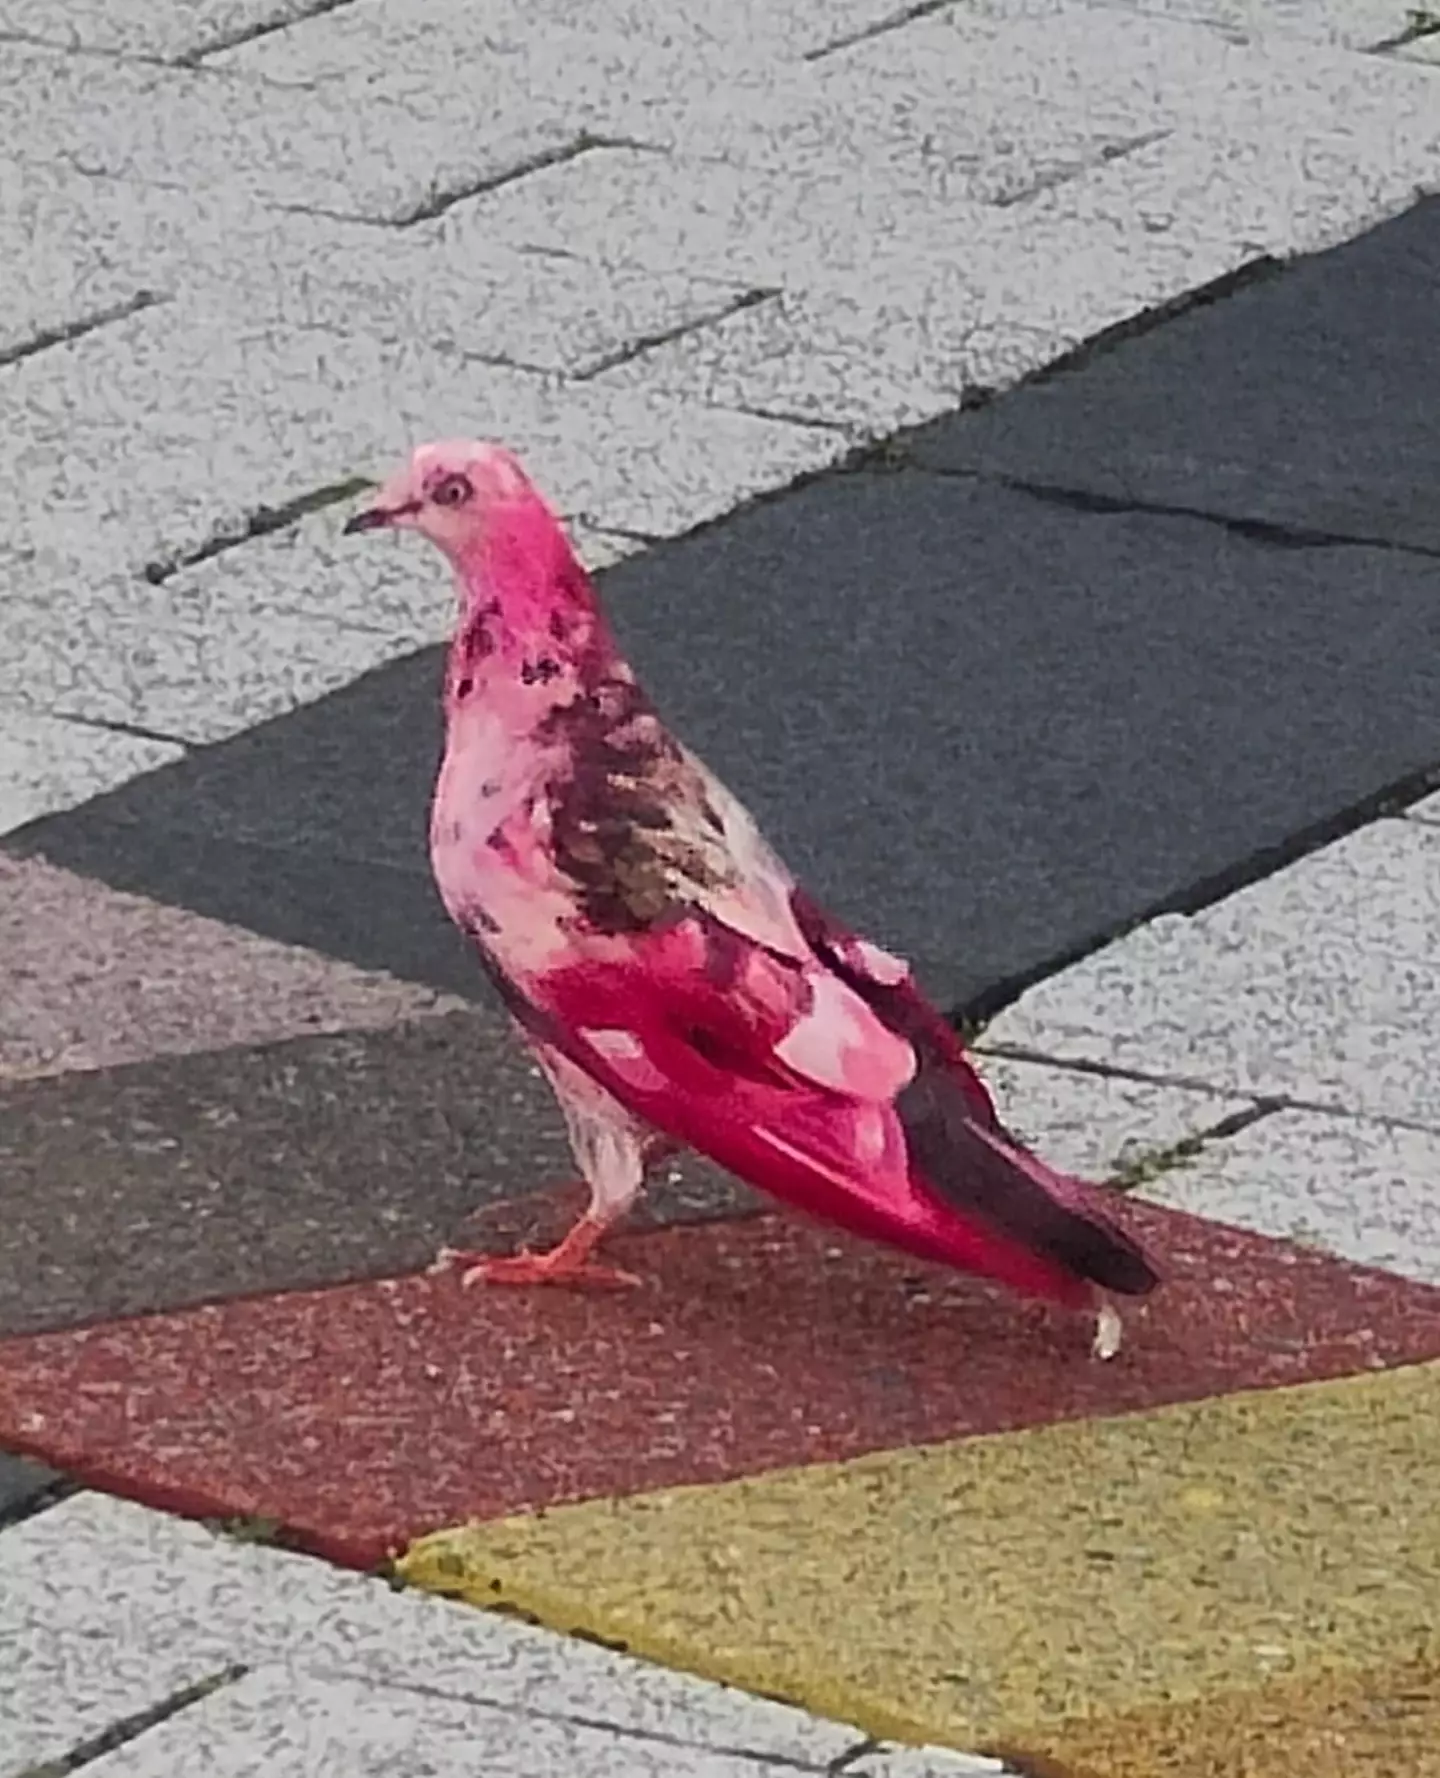 Multiple people have taken to social media with sightings of the pink bird.